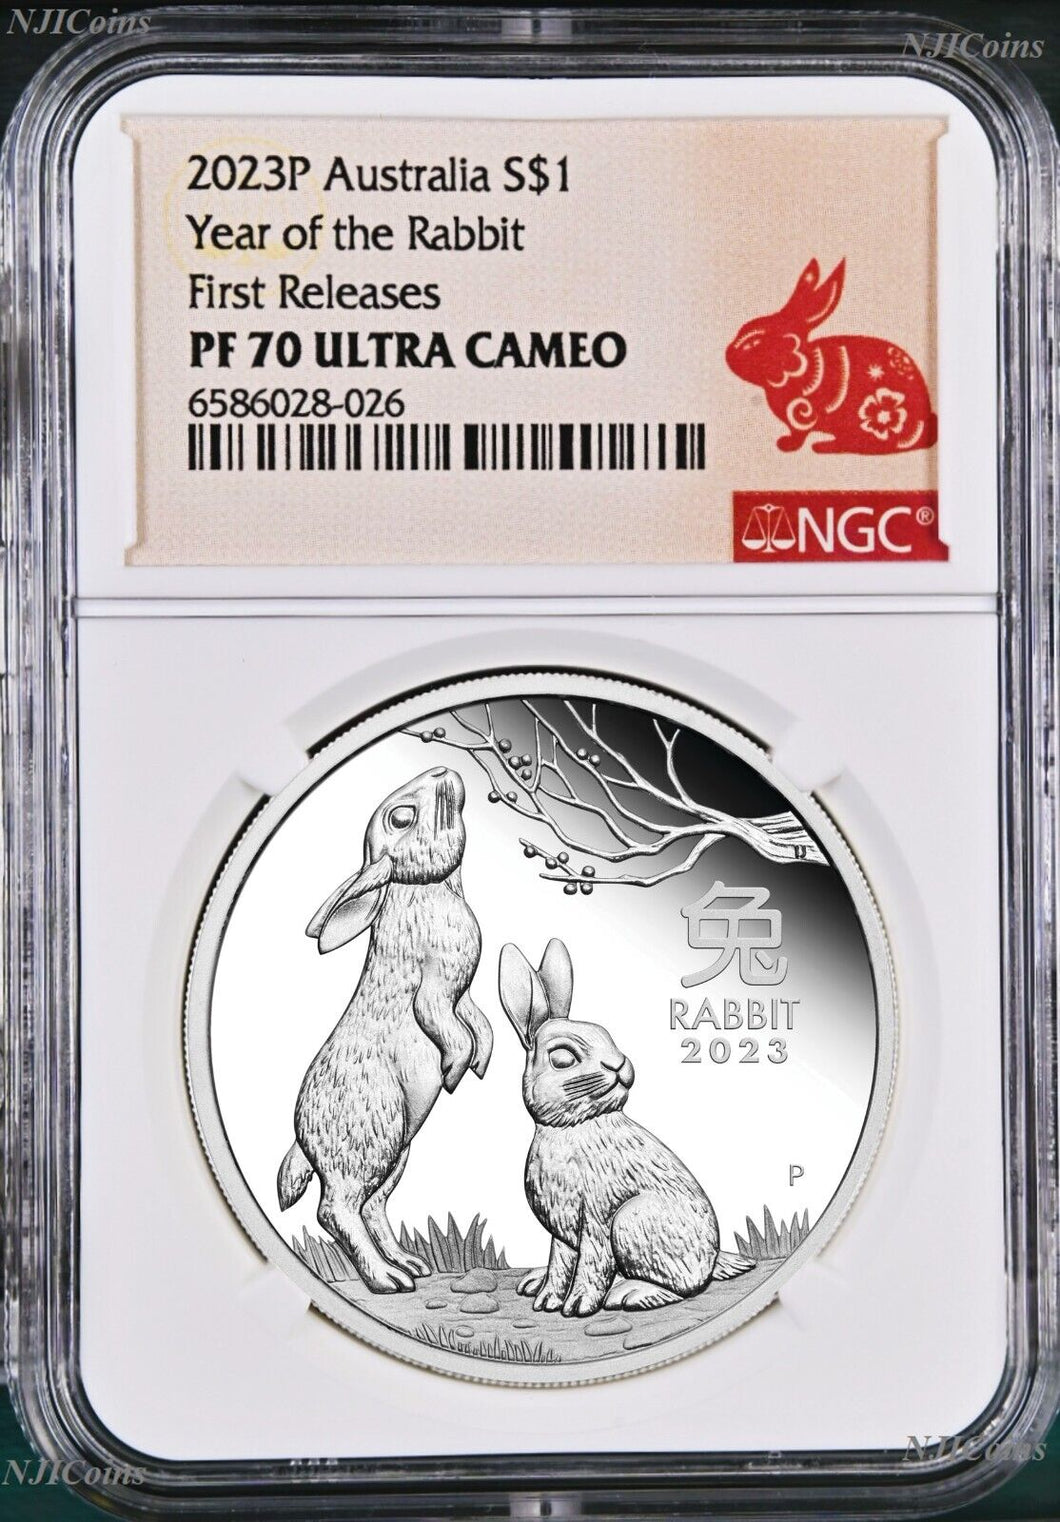 2023 Australia PROOF Silver Lunar Year of the Rabbit NGC PF70 1oz $1 Coin FR